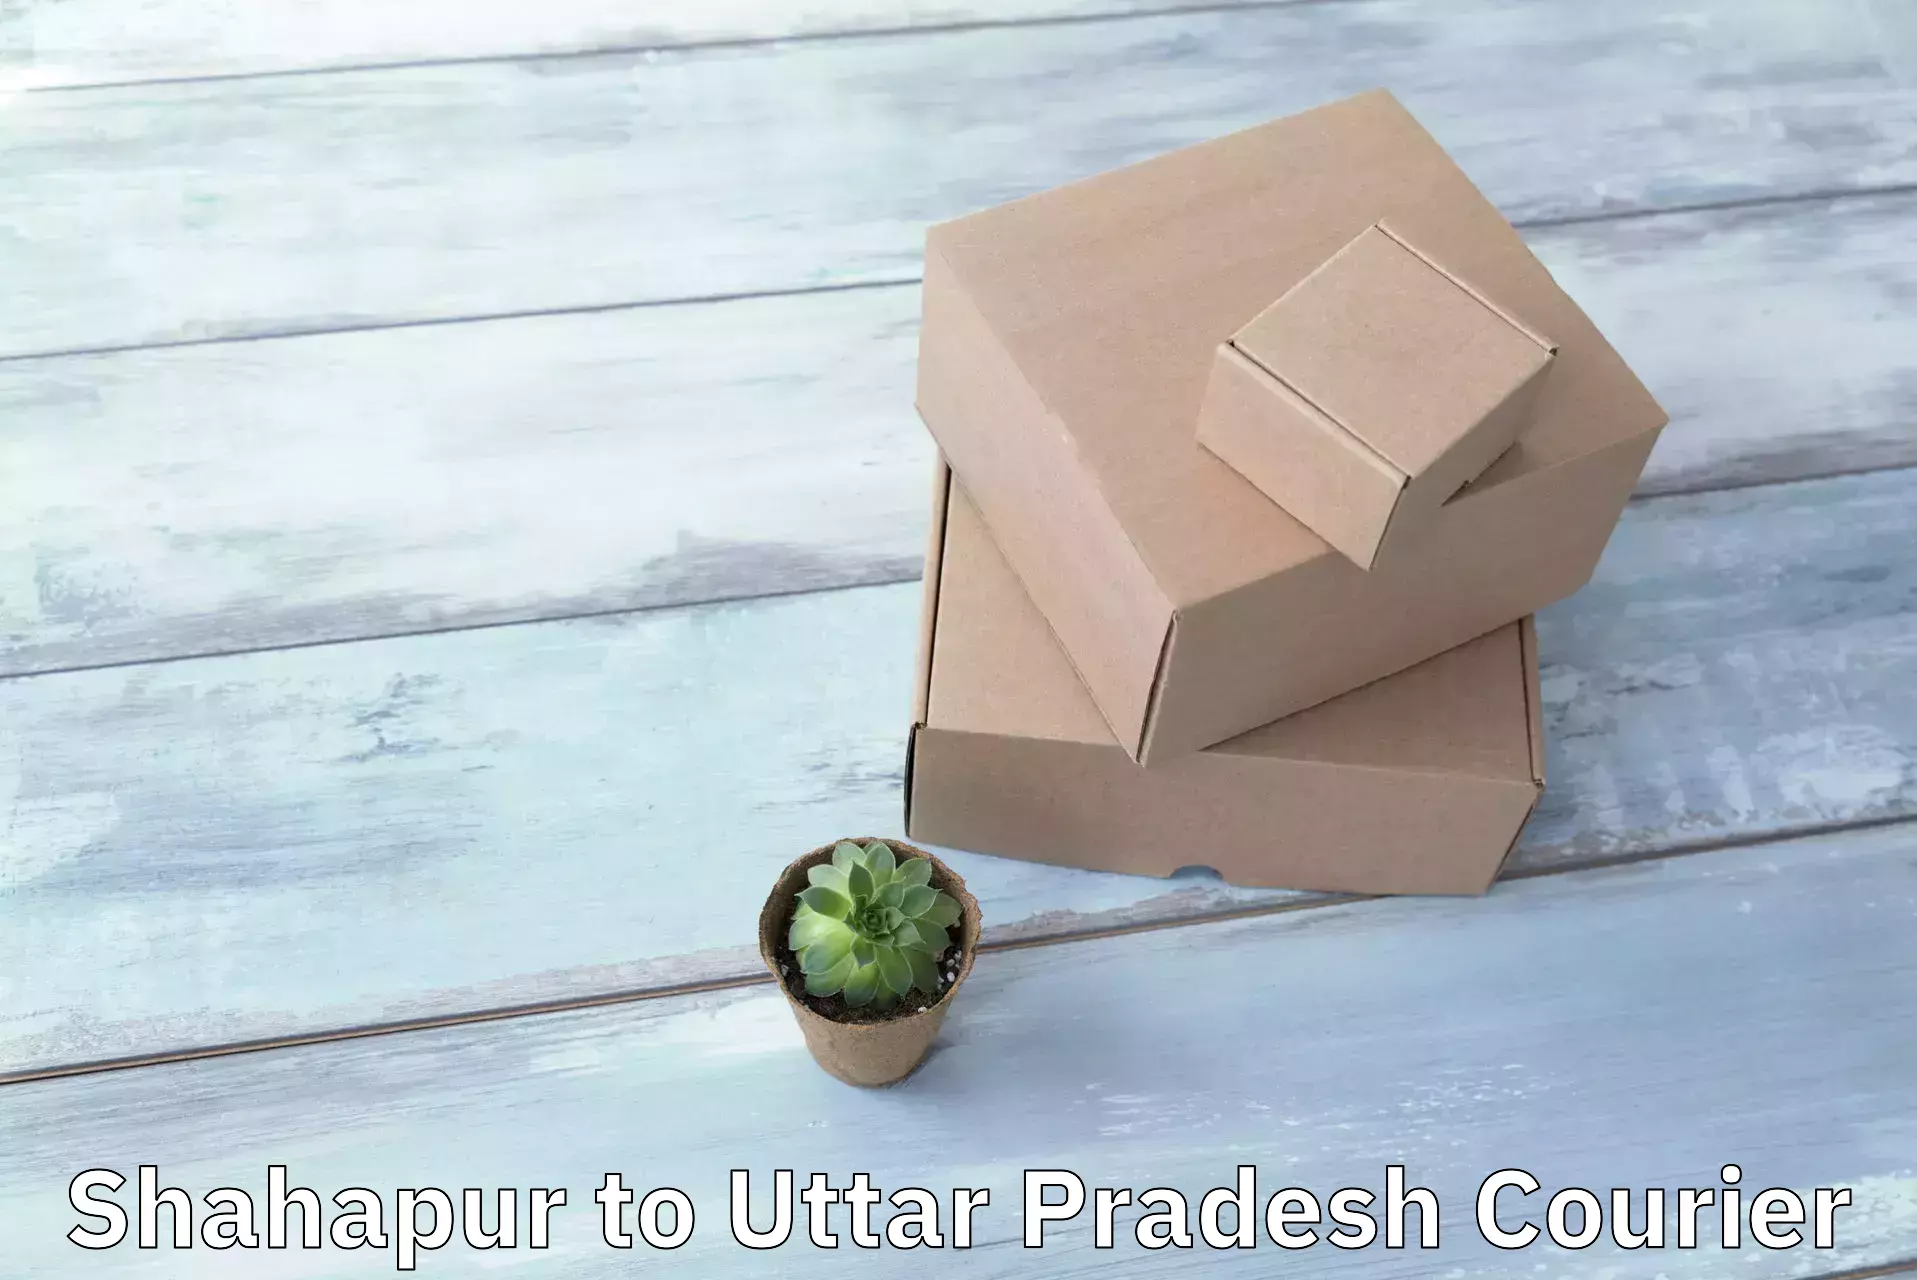 User-friendly delivery service in Shahapur to Chitrakoot